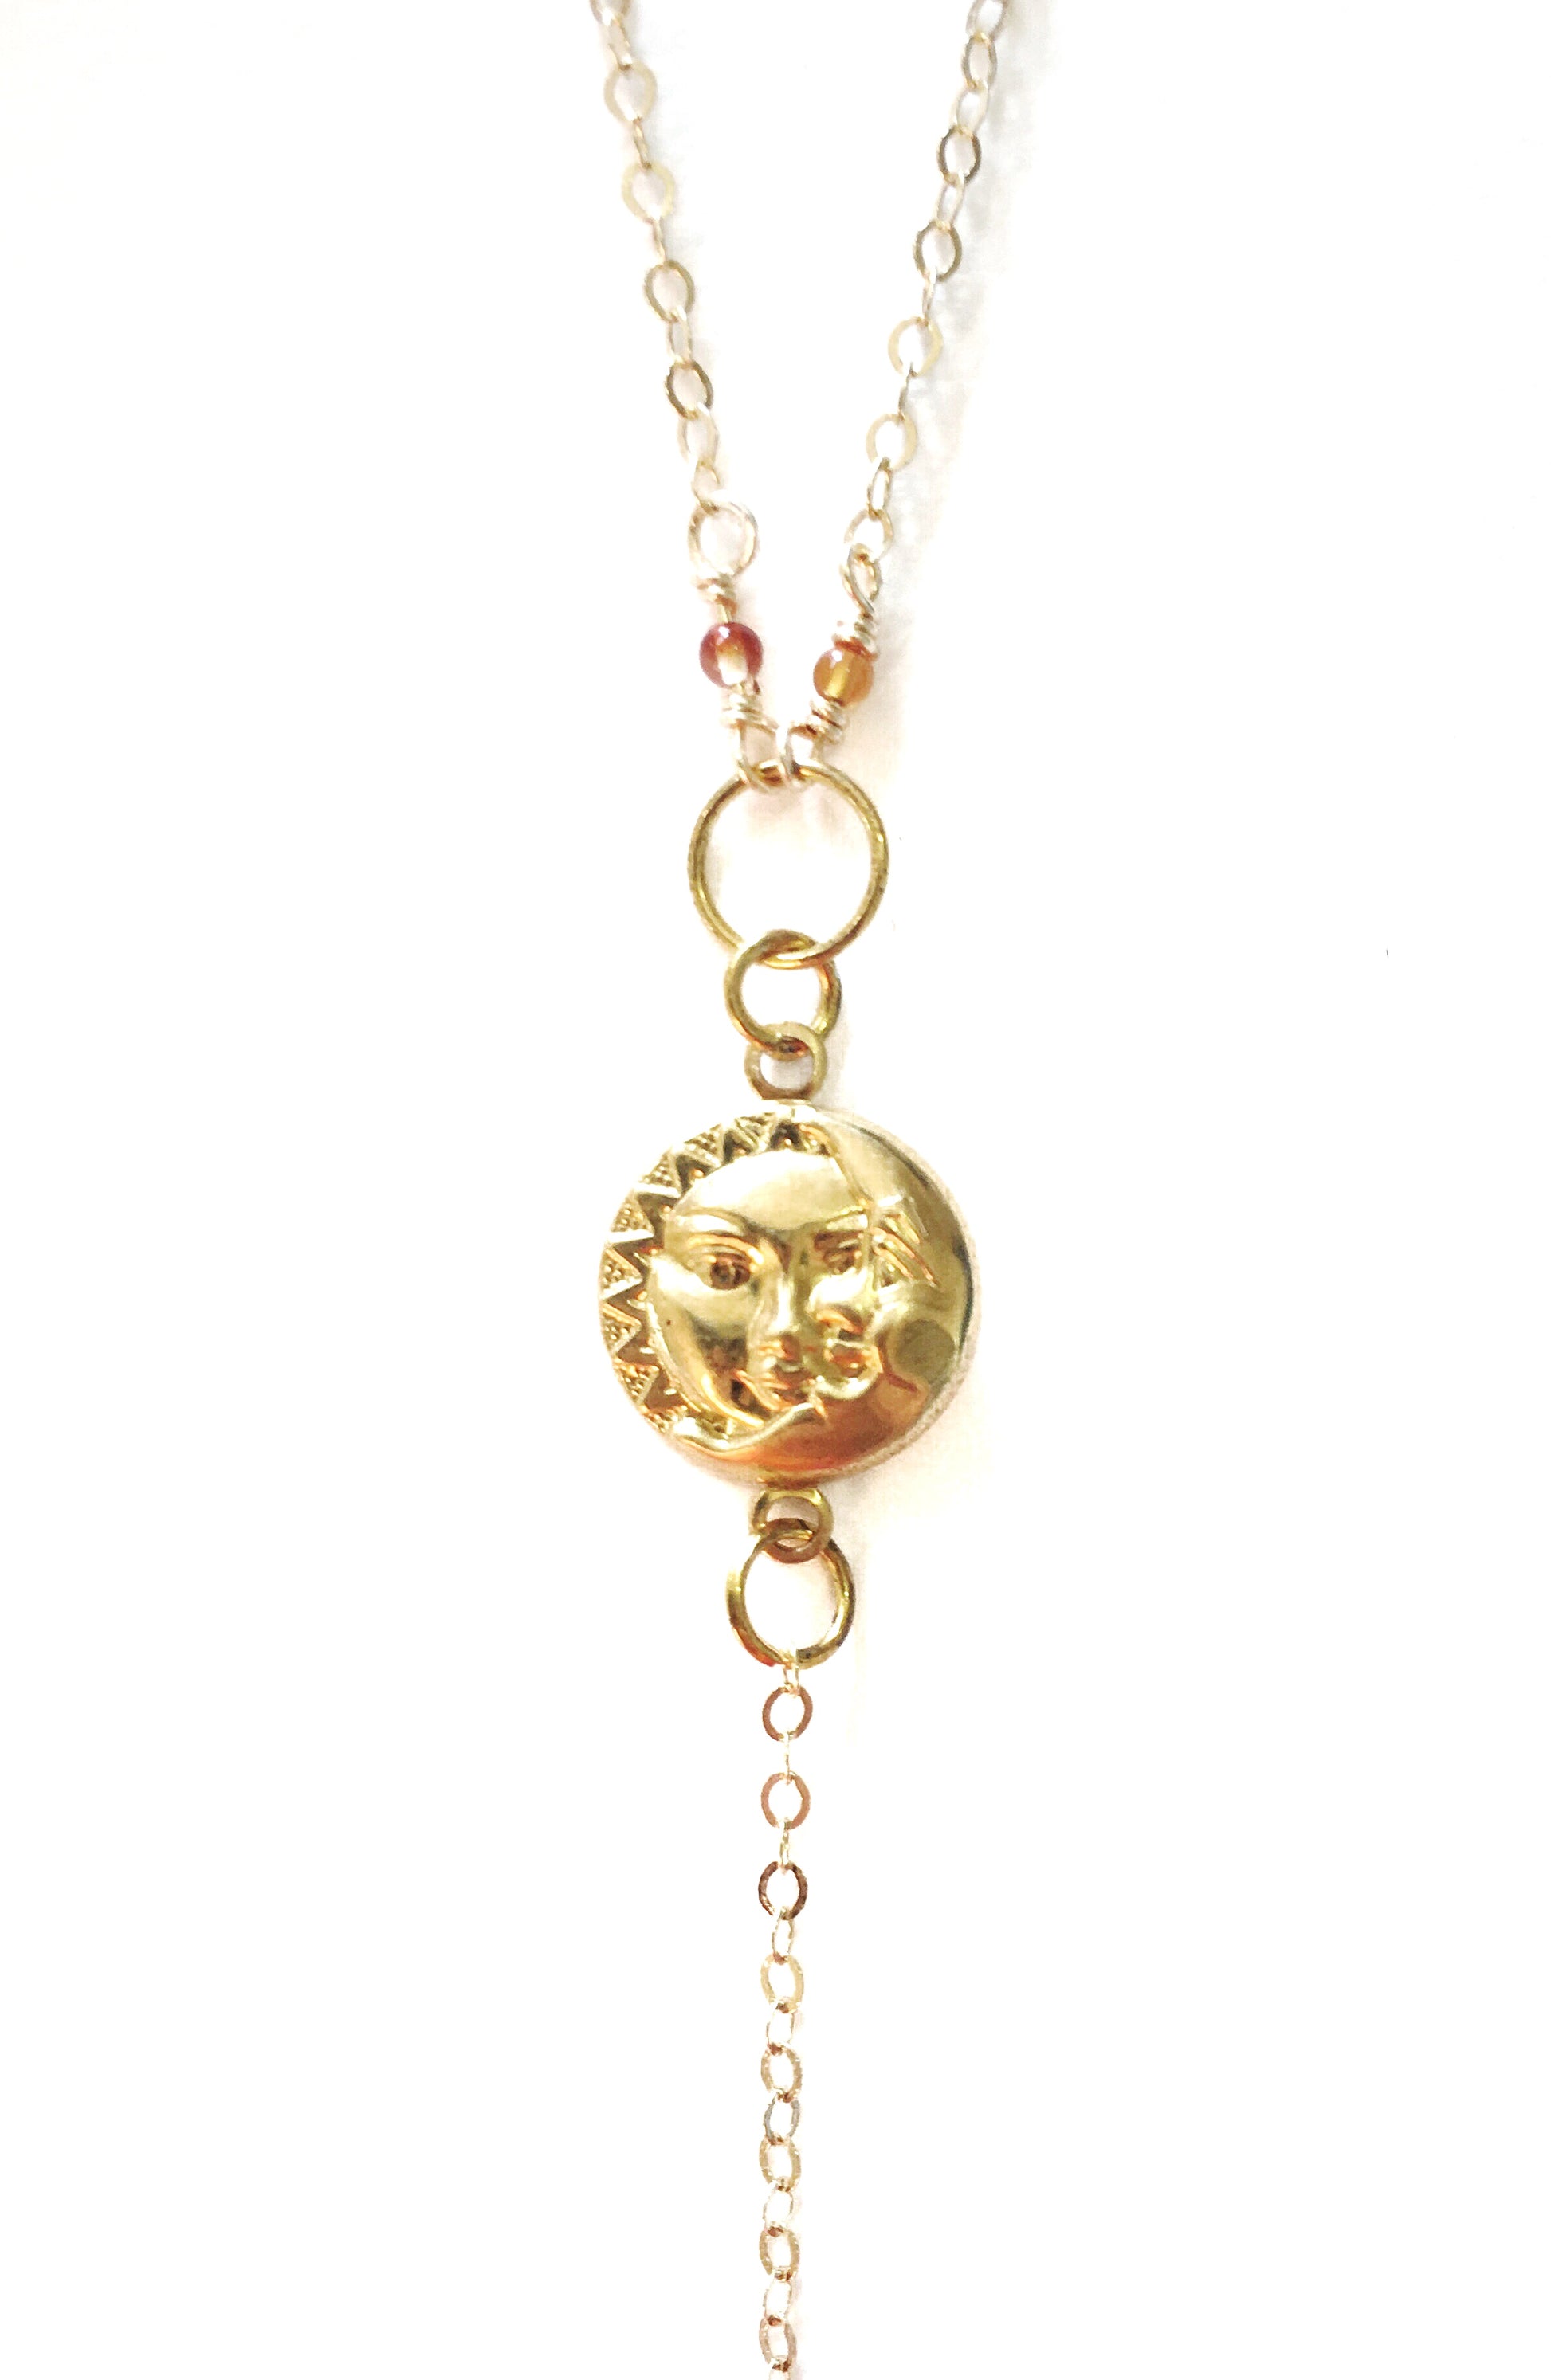 Celestial Lovers Necklace - Luni